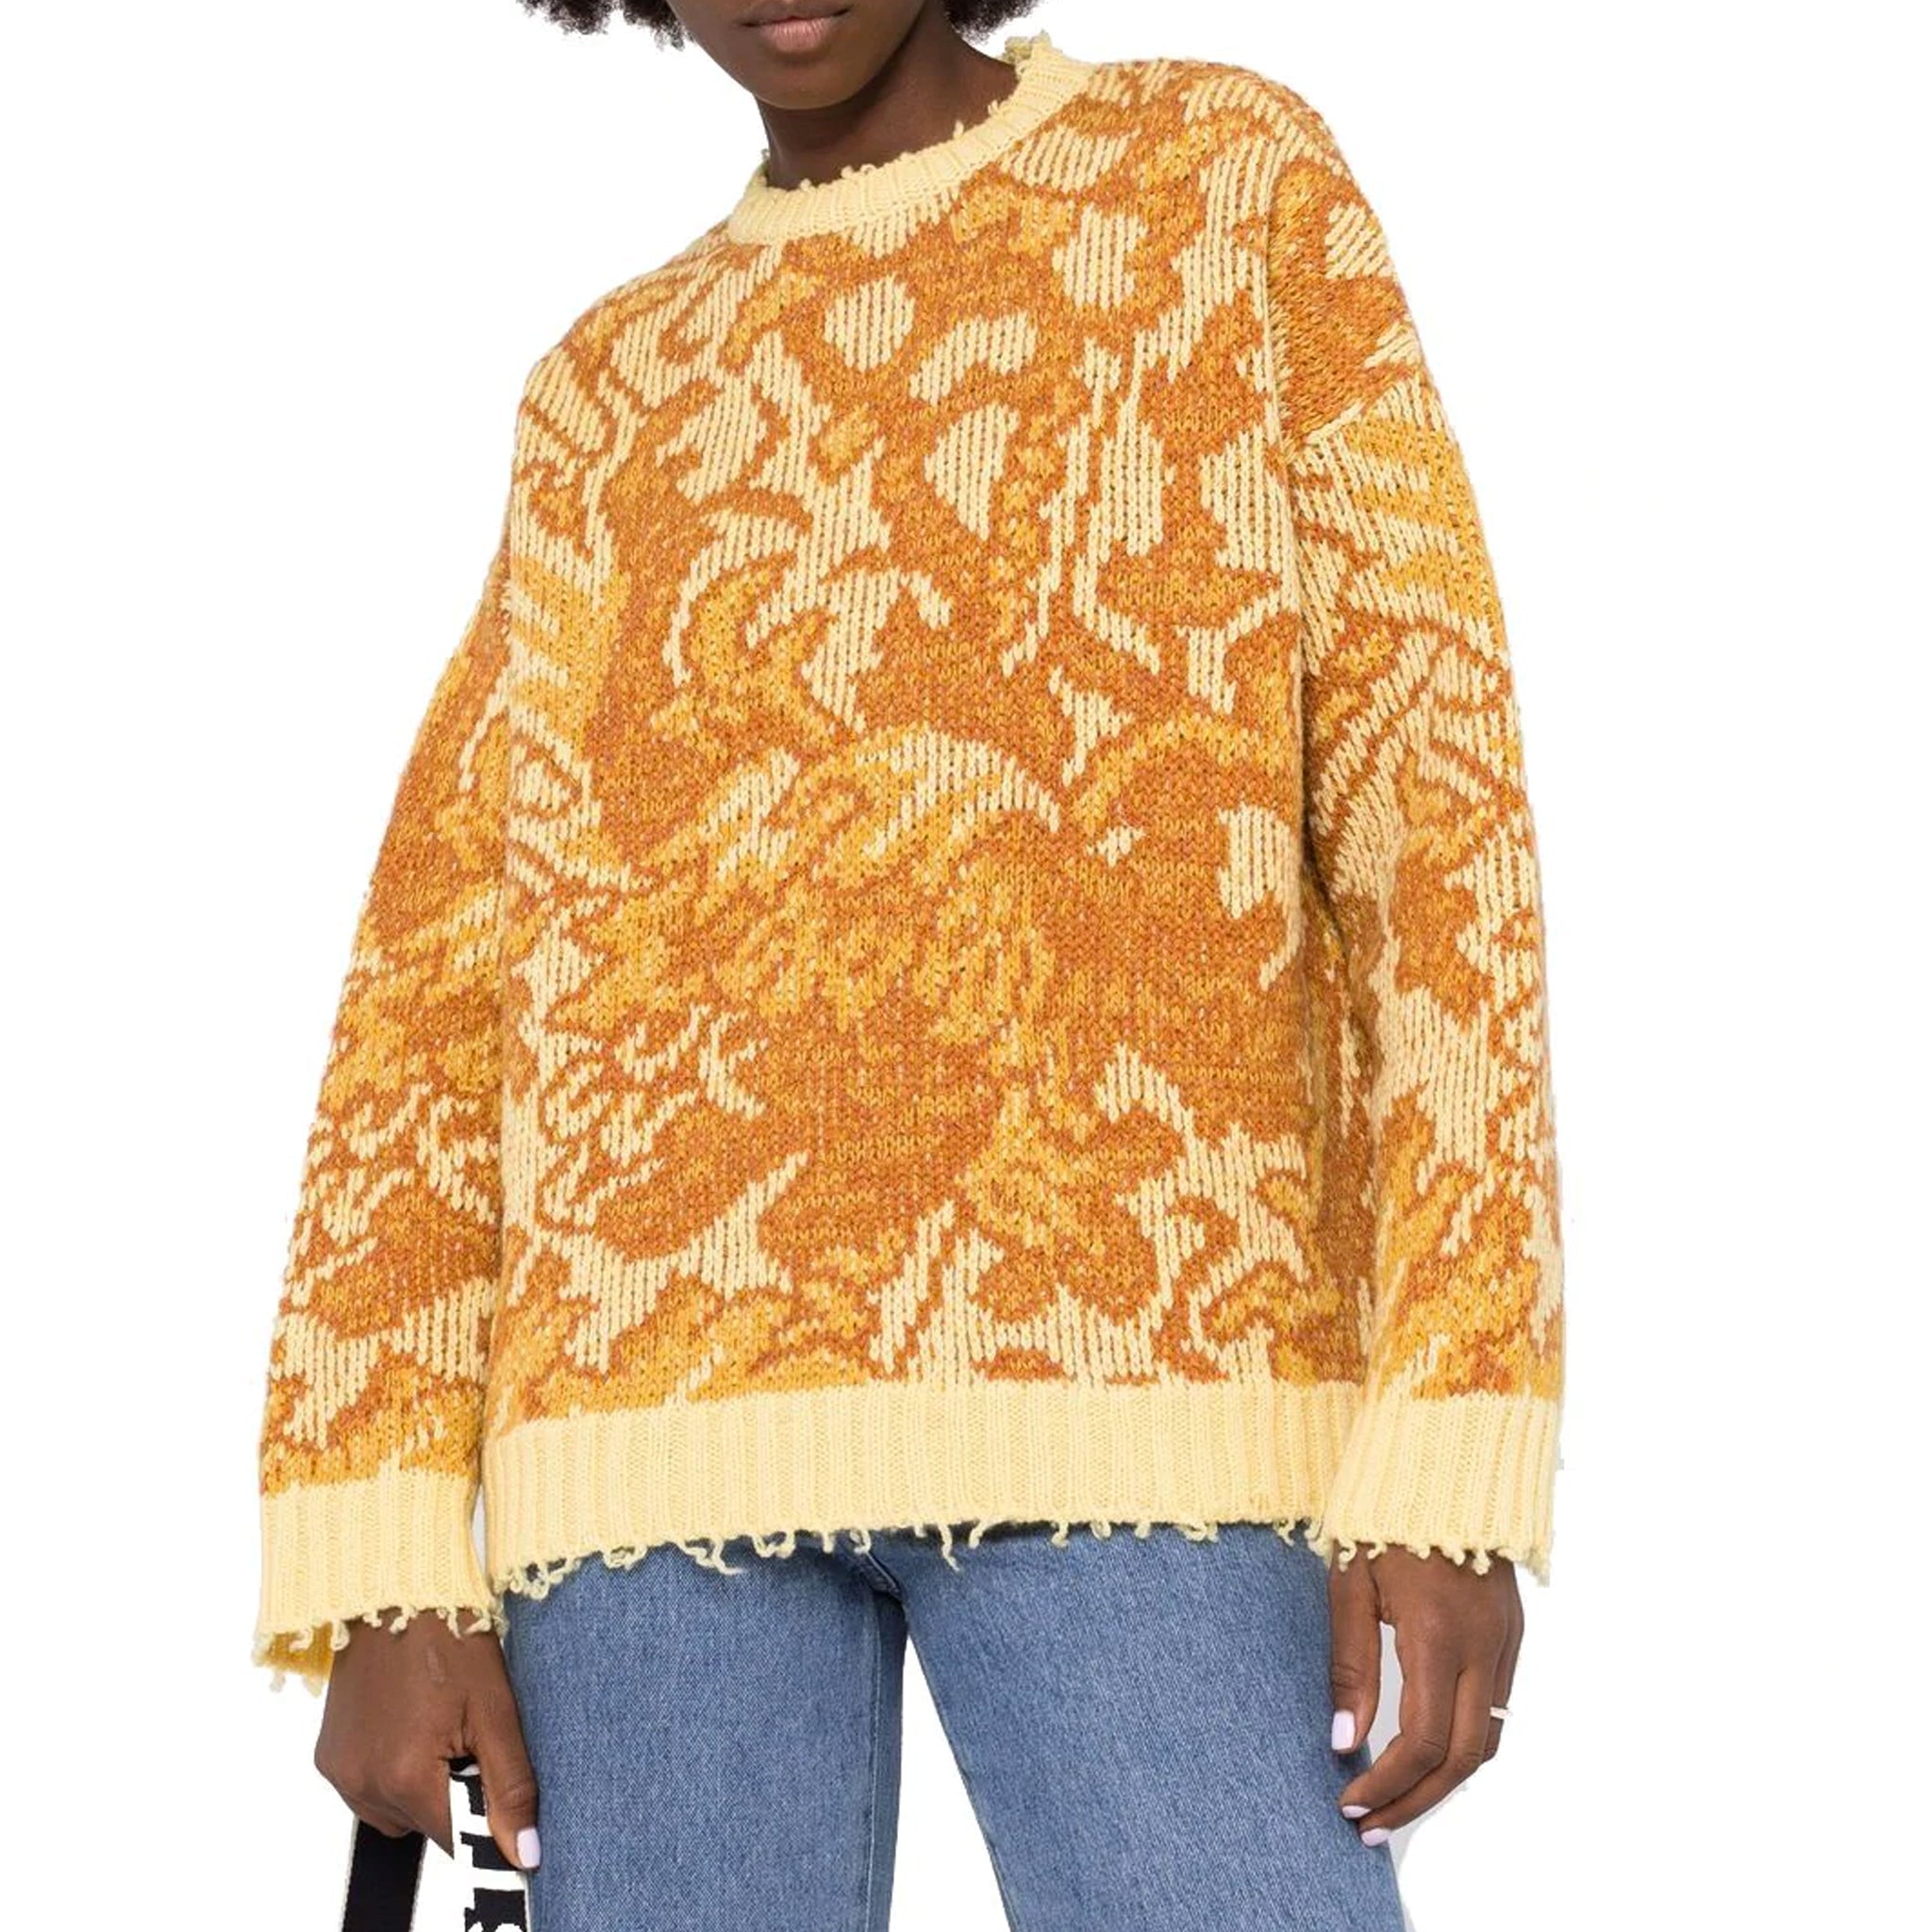 ETRO-OUTLET-SALE-Etro-Jacquard-Wool-Sweater-Strick-YELLOW-M-ARCHIVE-COLLECTION-2.jpg